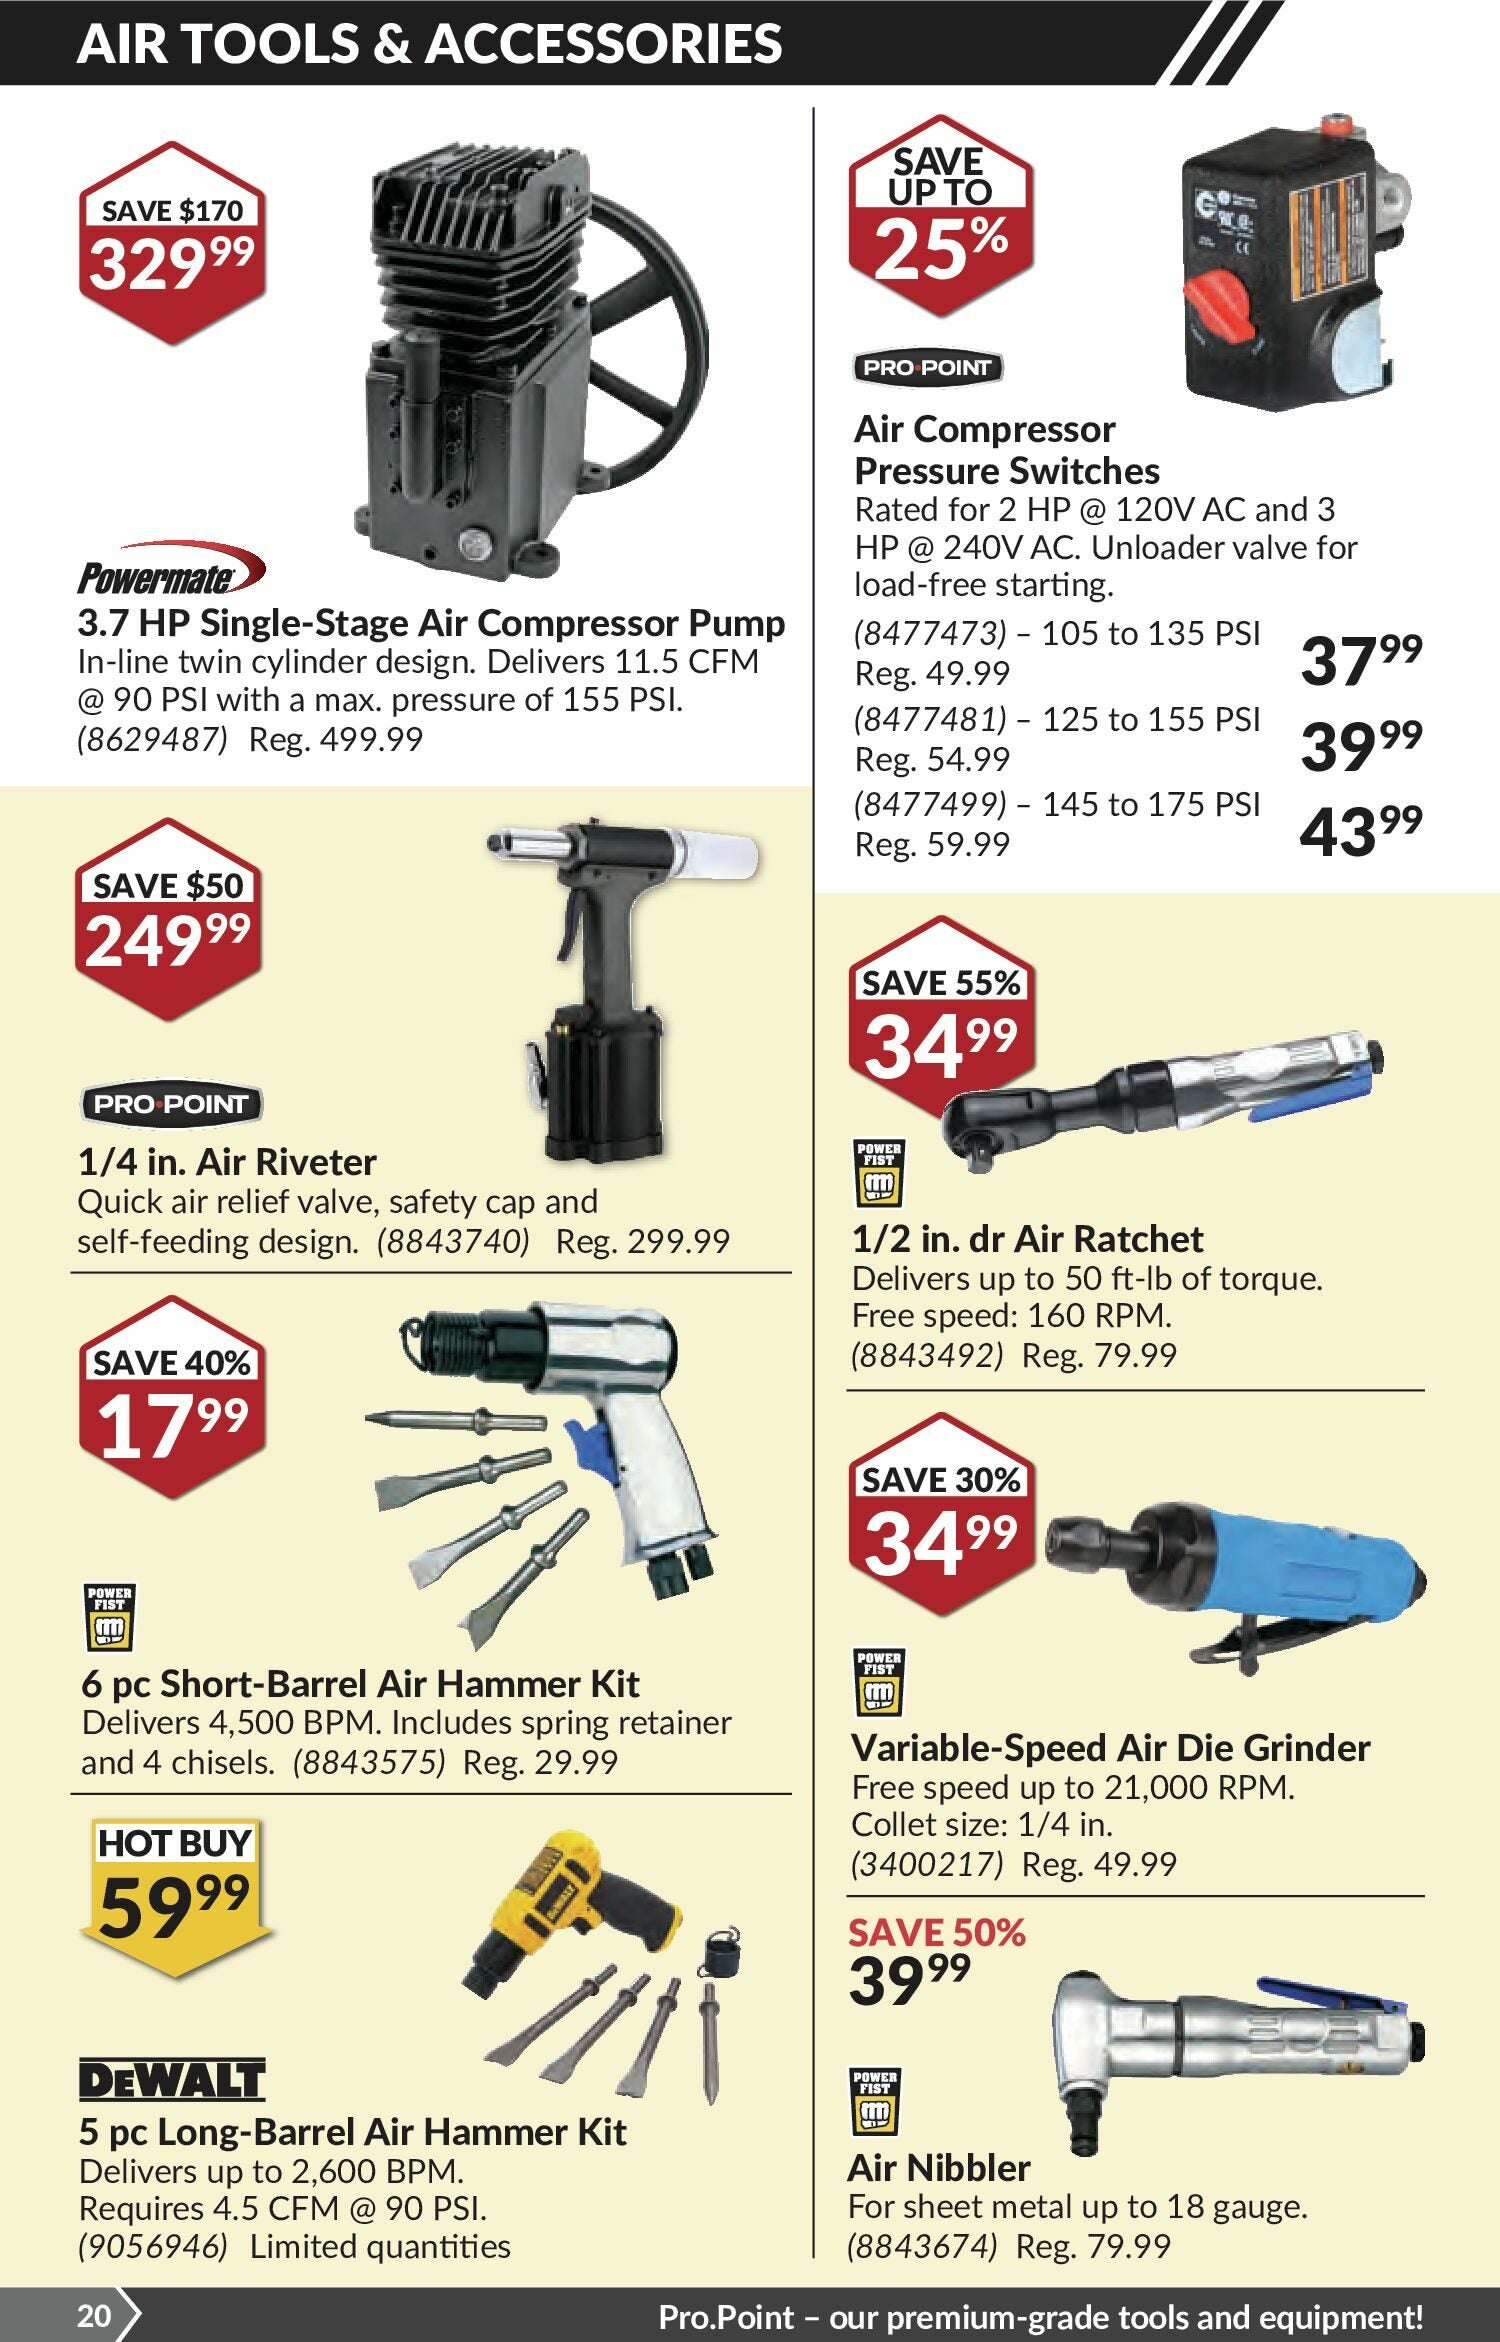 Princess Auto Weekly Flyer - 2 Week Sale - Load Up The Deals - Aug